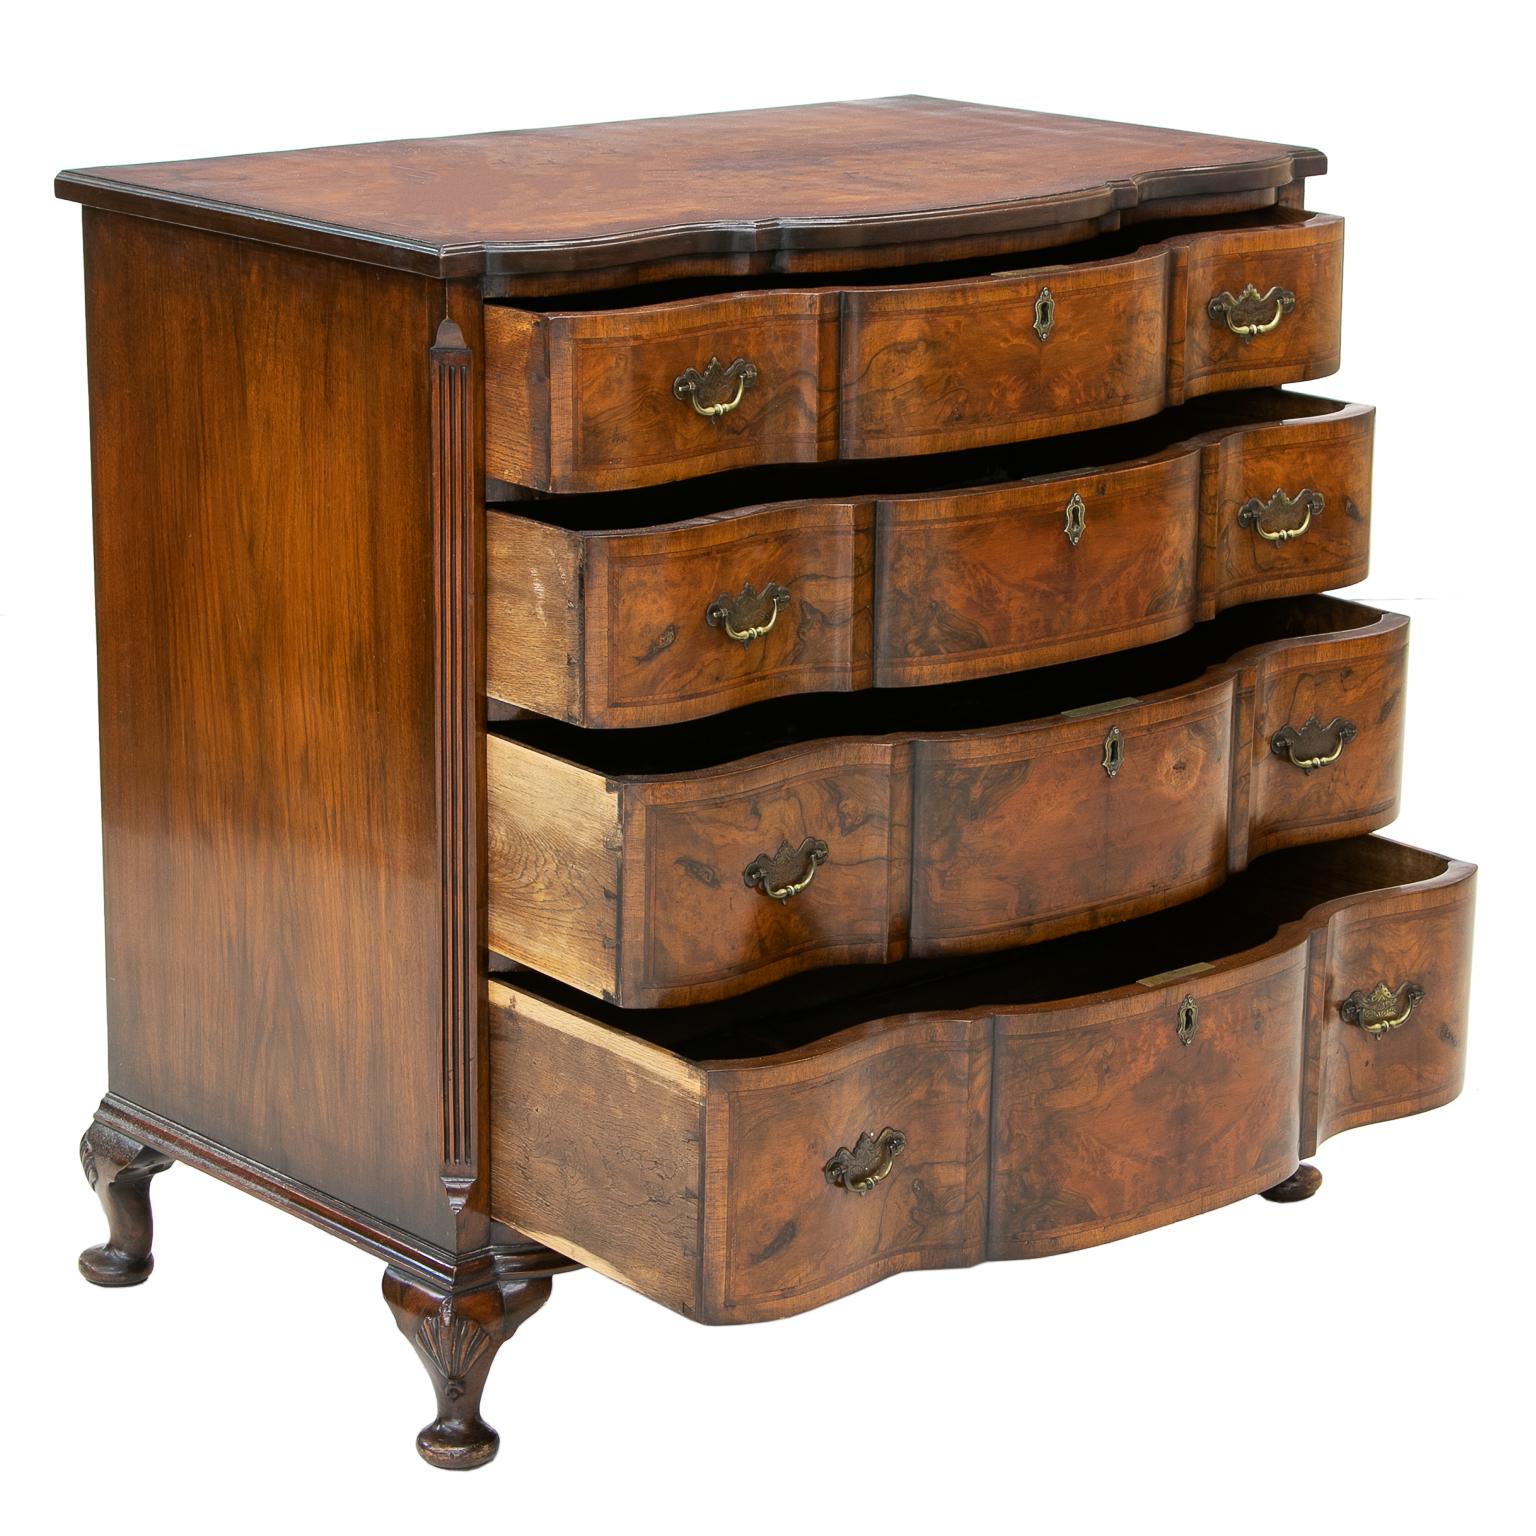 Queen Anne burl walnut chest
Queen Anne burl walnut chest of drawers resting on four cabriole legs with shell carved knees and pad feet.
There are four shaped front drawers with beautiful matched burling and walnut herringbone inlay. Nice brass